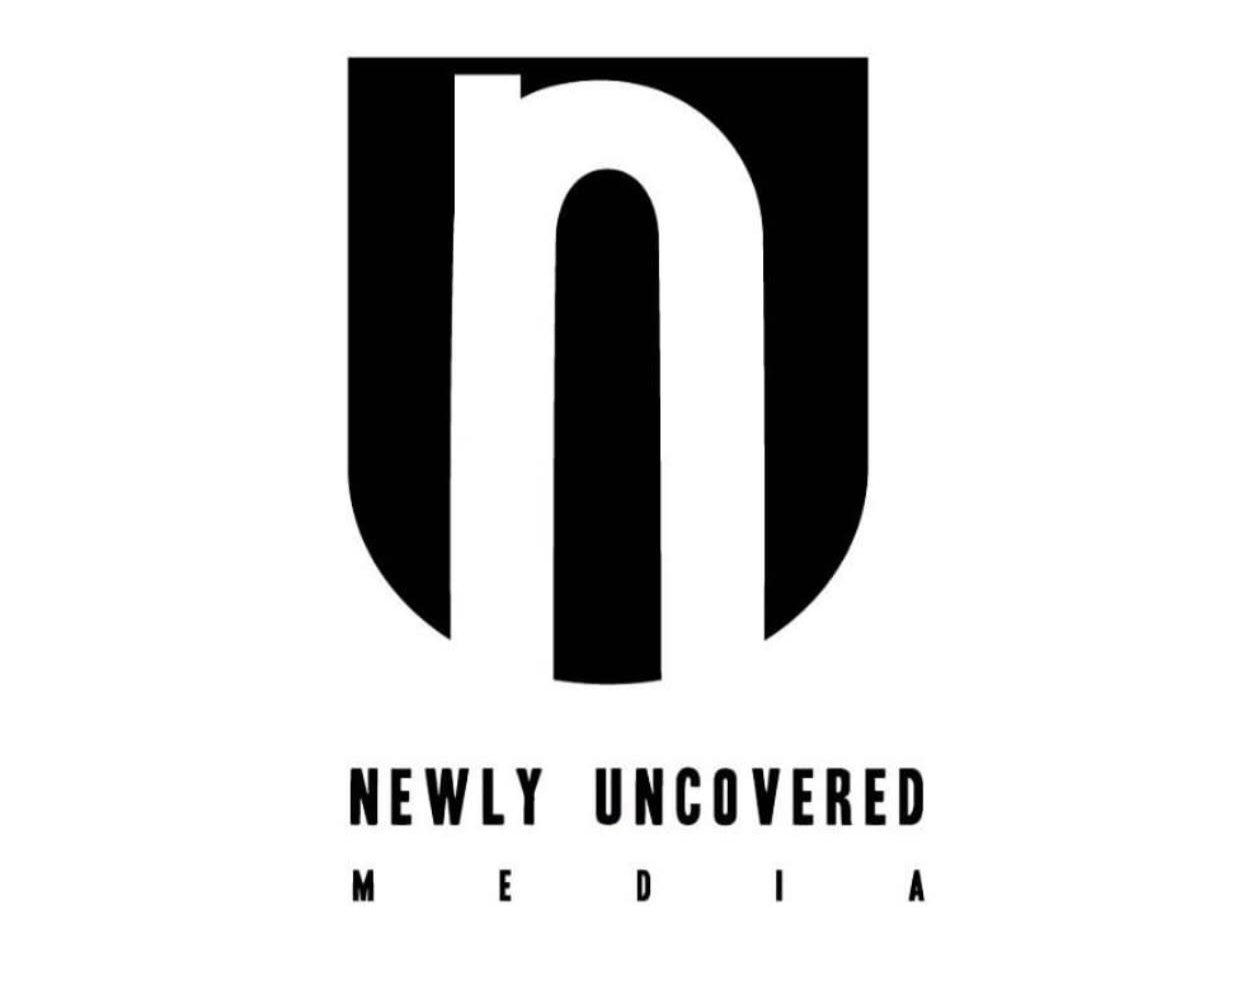 Newly Uncovered Media